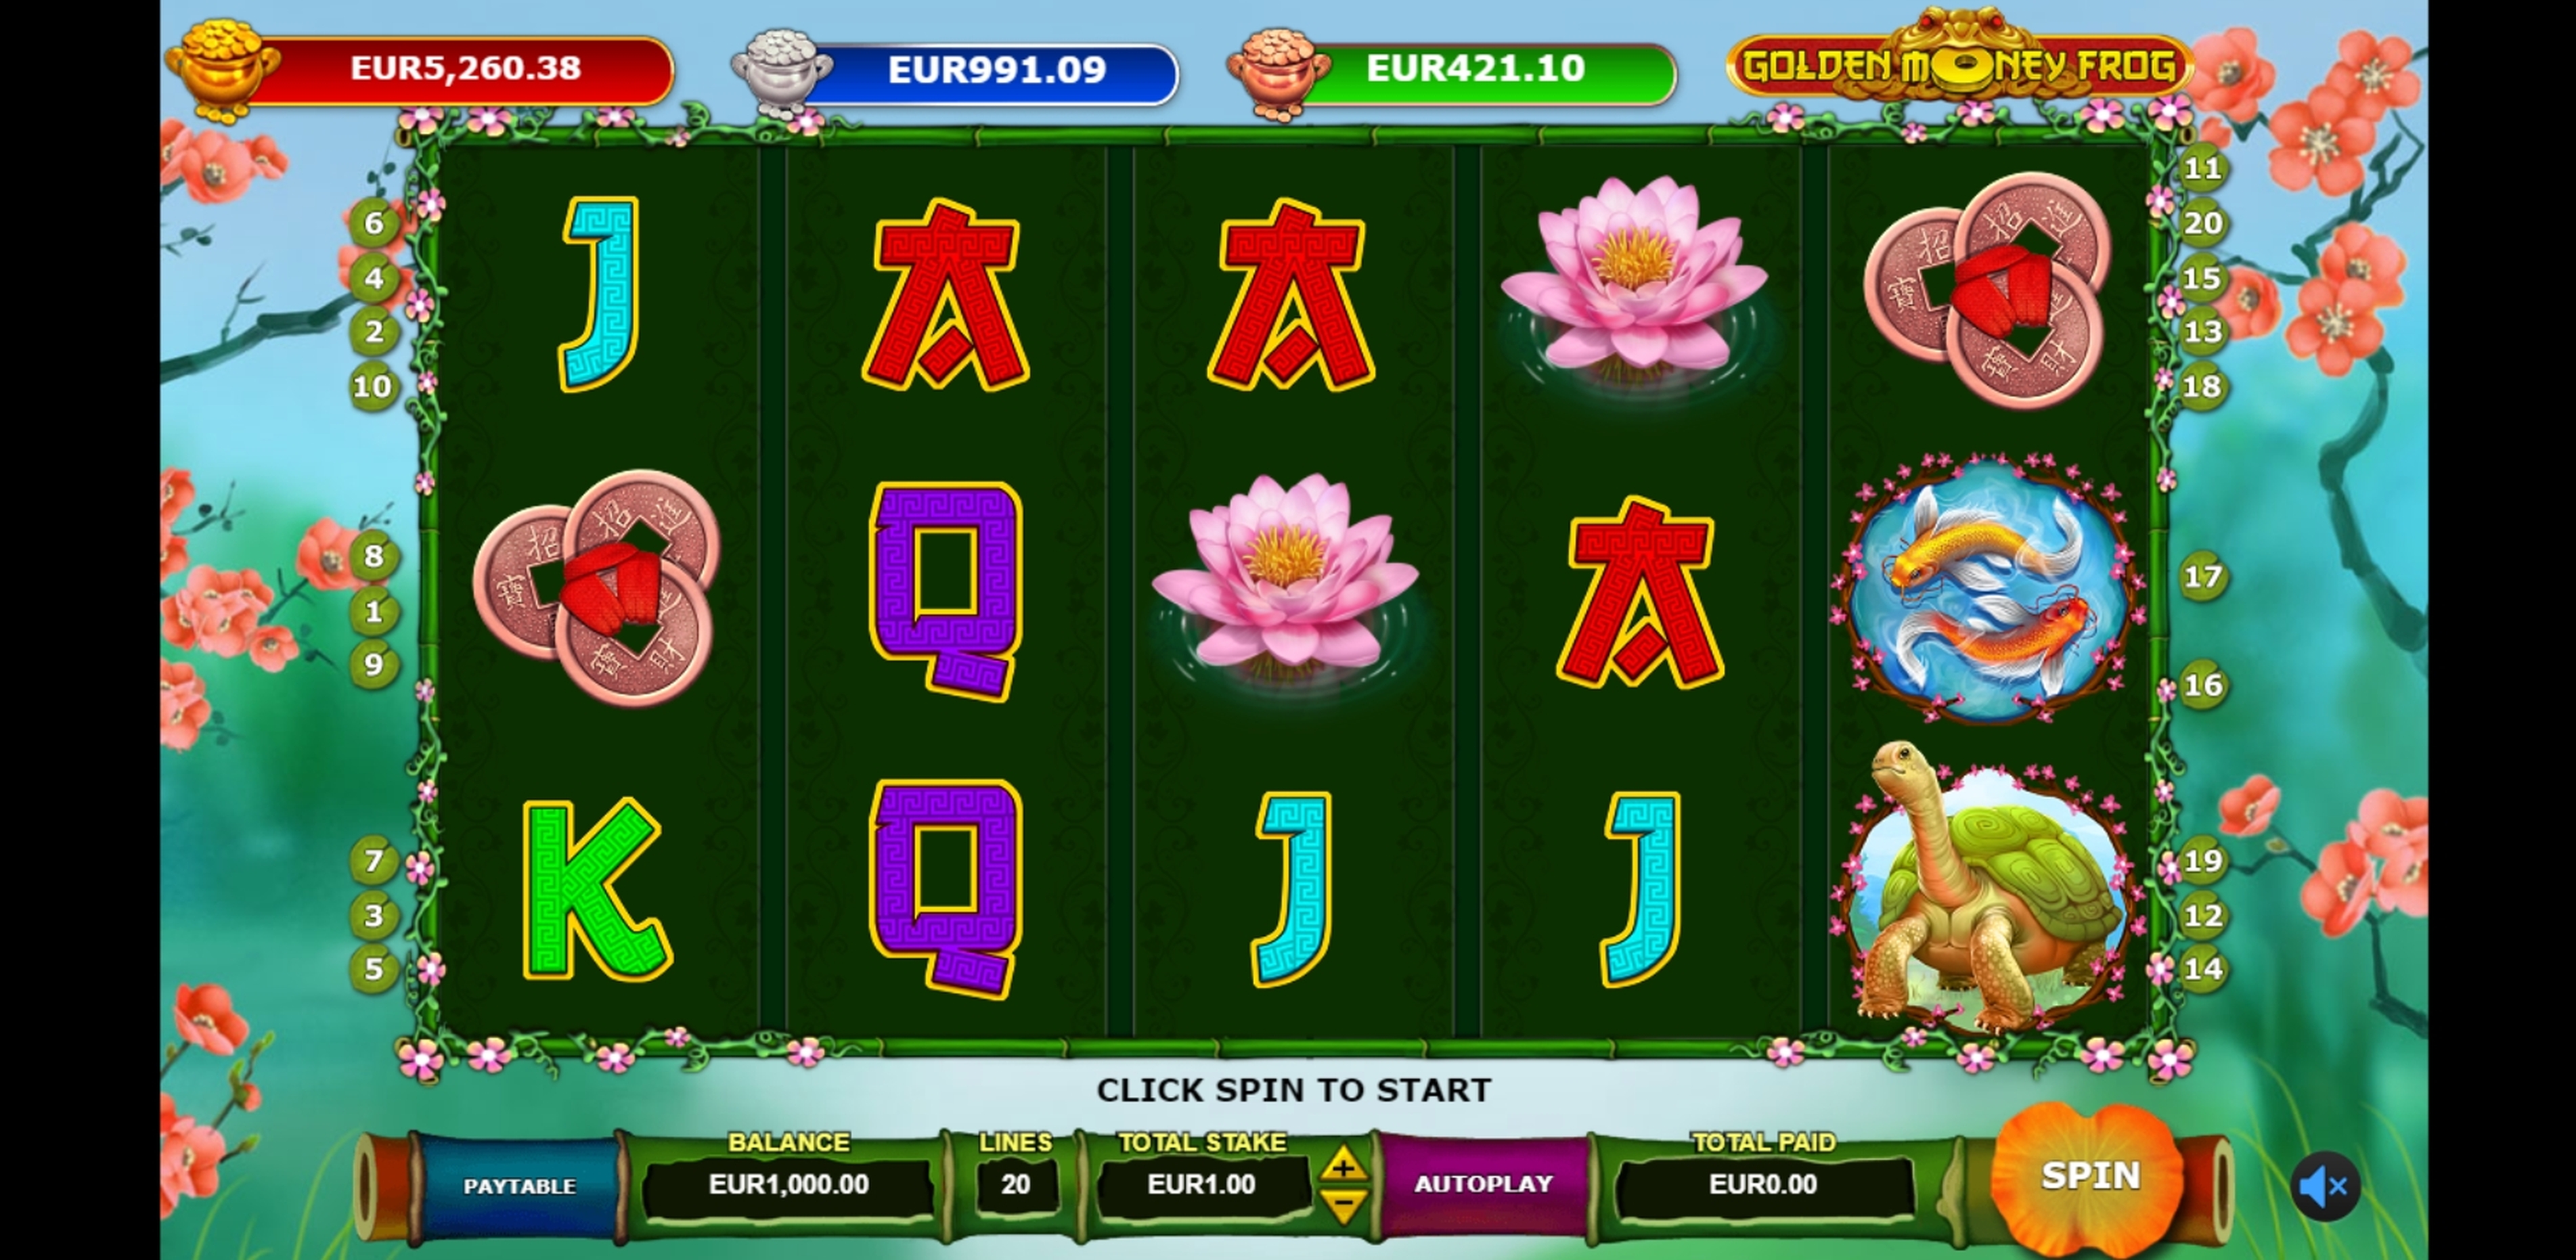 Reels in Golden Money Frog Slot Game by Sigma Gaming